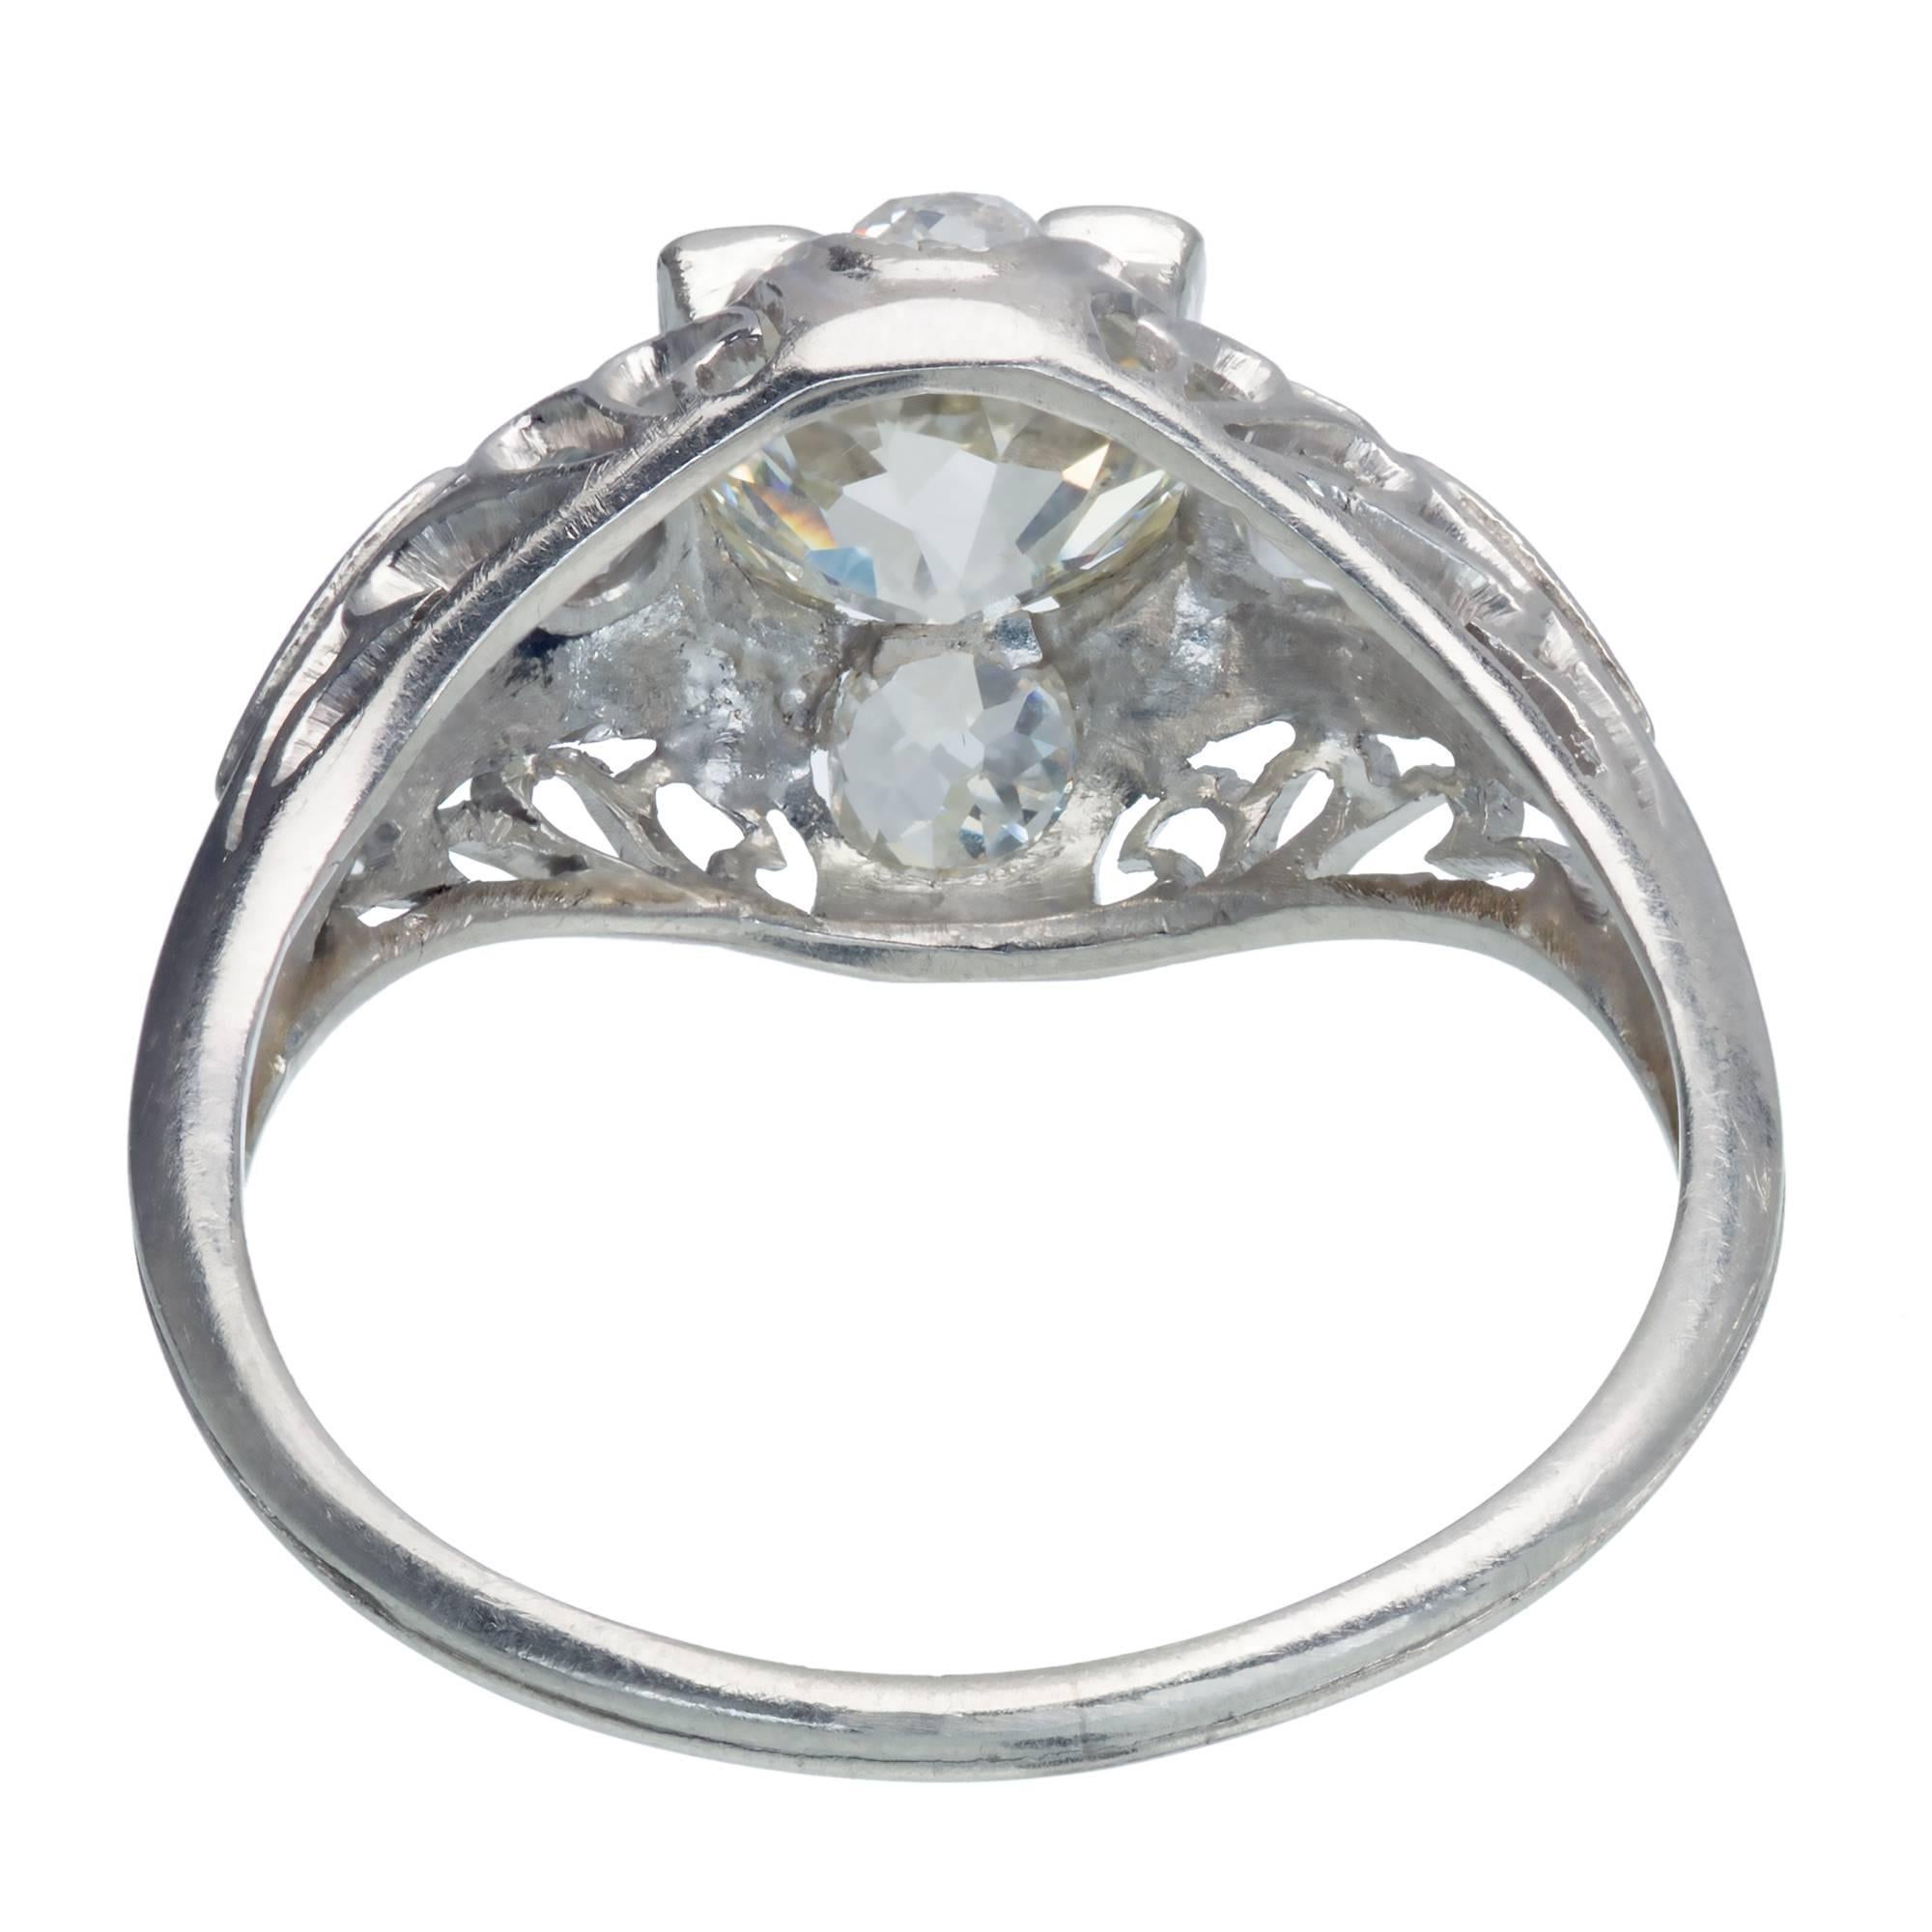 Handmade antique Platinum filigree engagement ring, circa 1870s set with wonderful old old European and mine cut Diamonds in a domed pierced engagement setting.

1 old European cut Diamond, approx. total weight 1.40cts, I – J, VS2, EGL certificate #